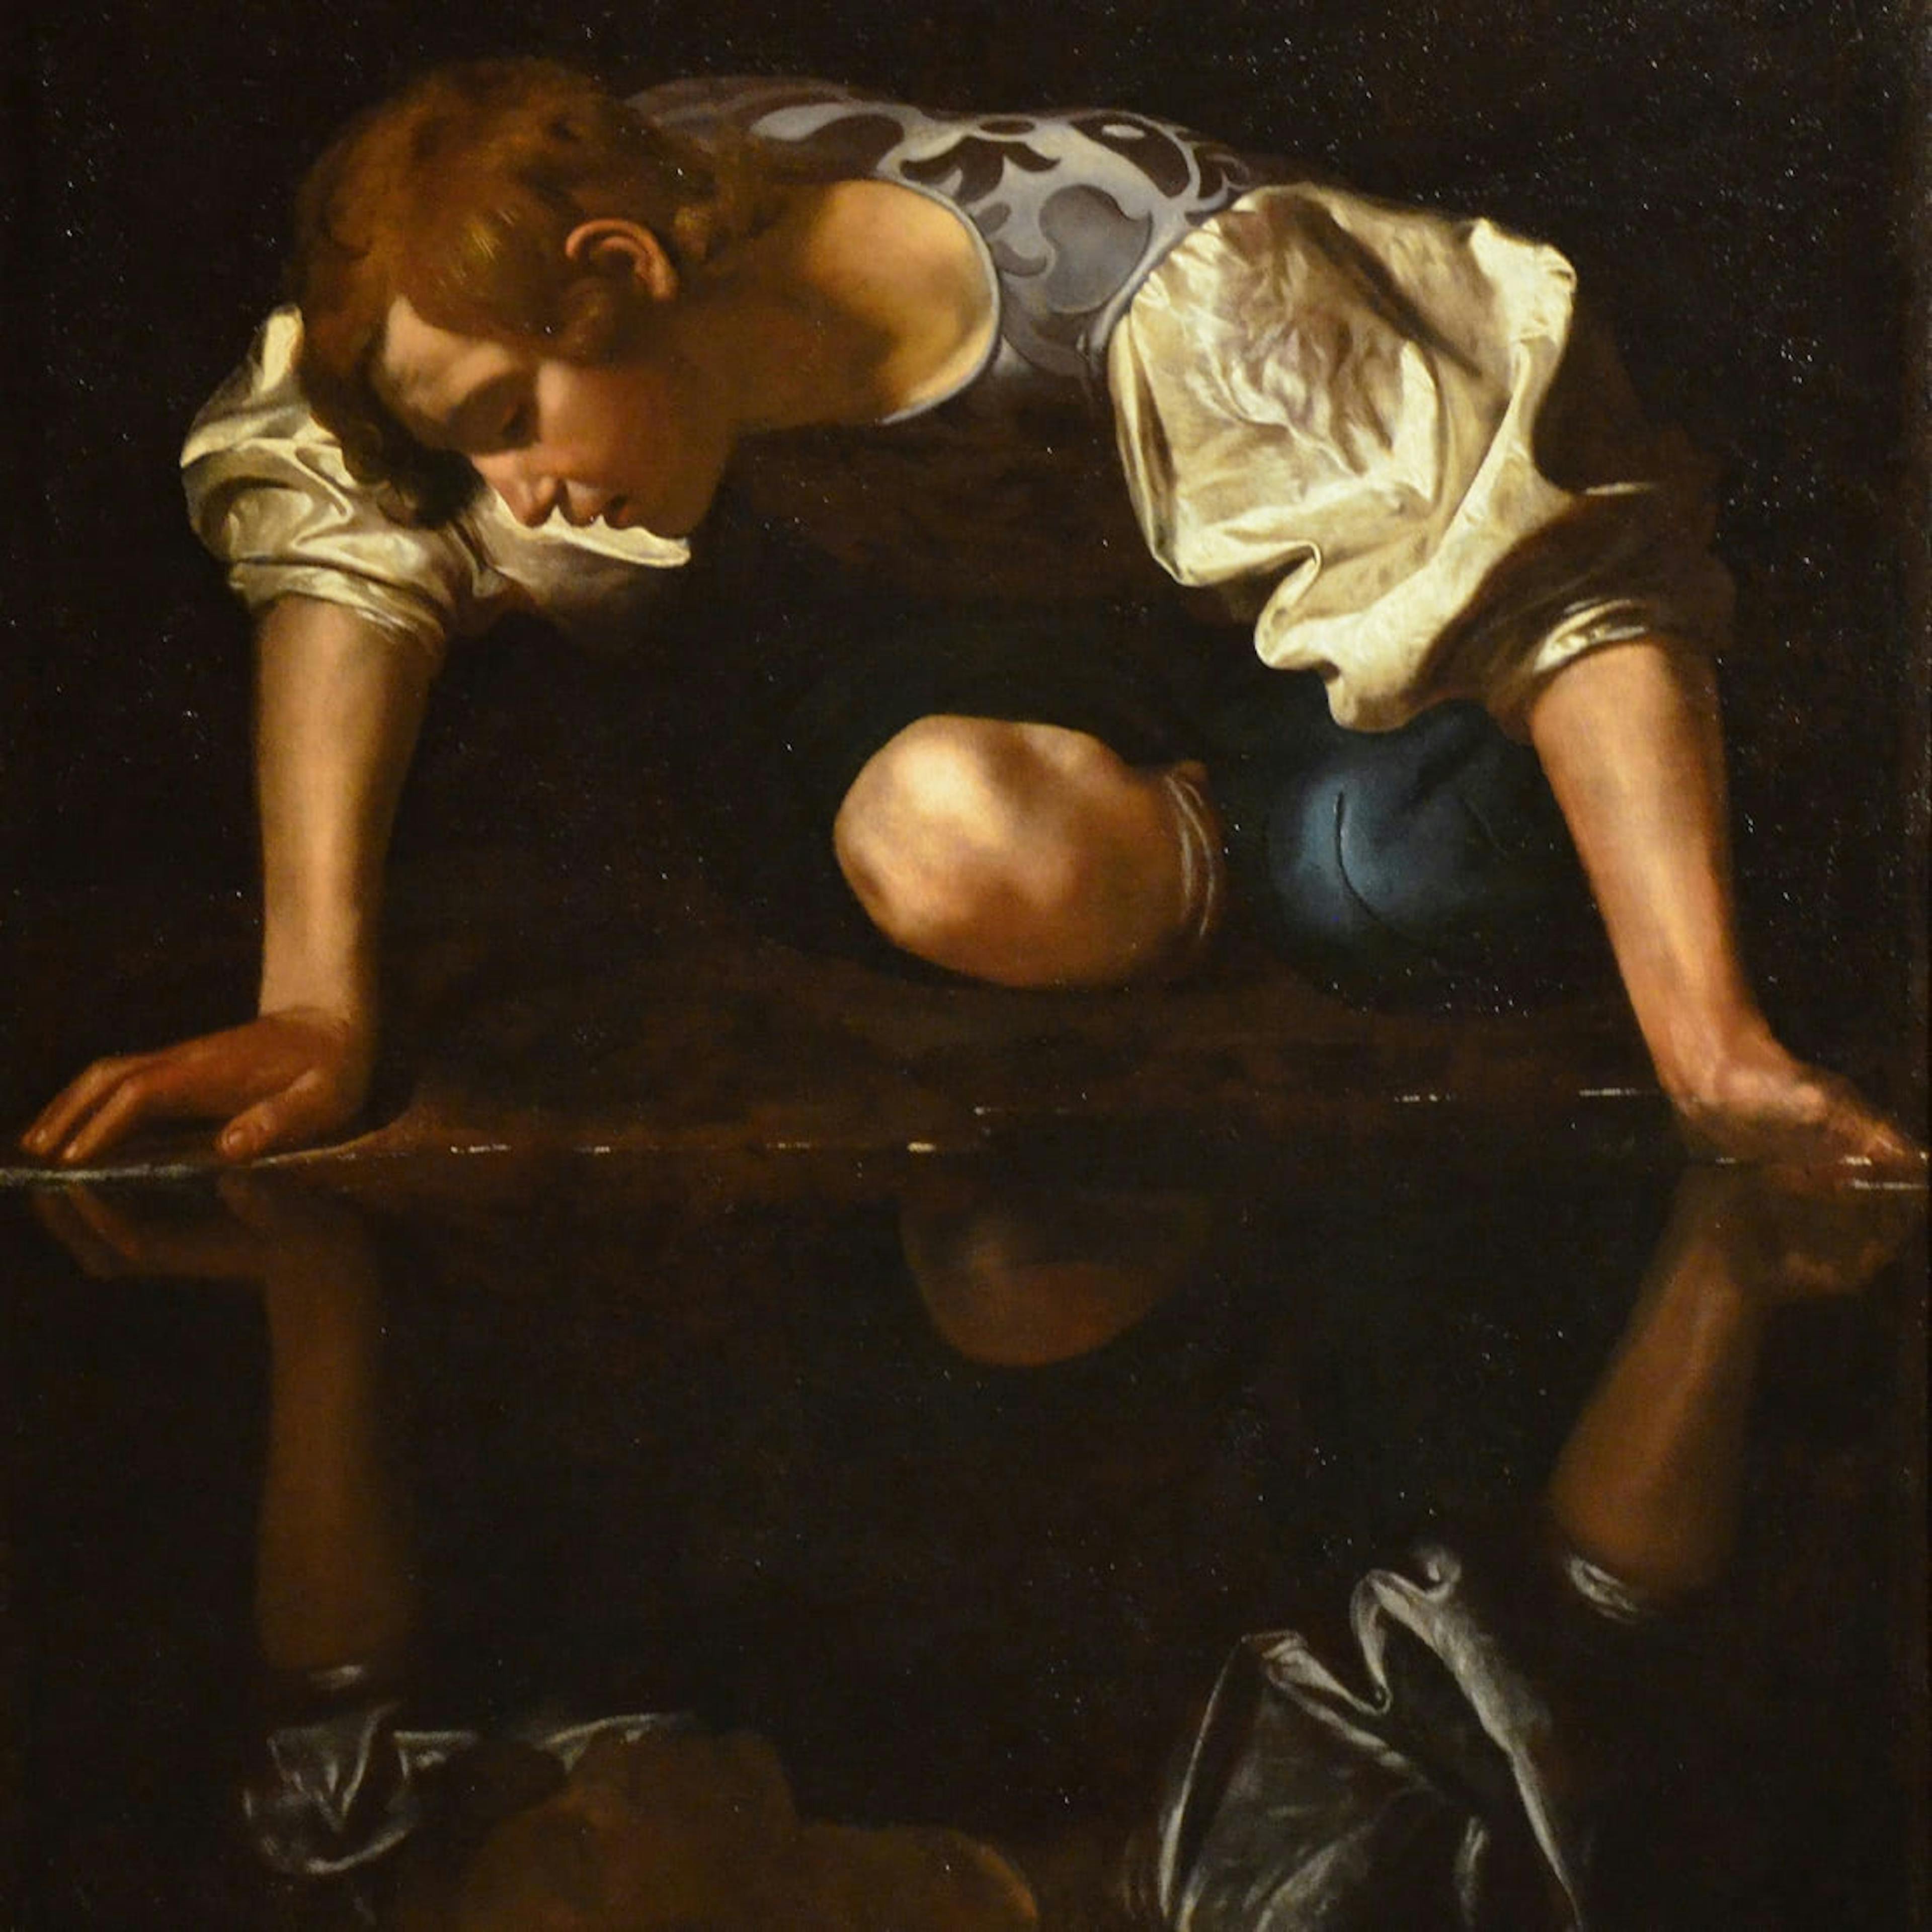 A painting by Caravaggio of Narcissus staring at his own reflection.